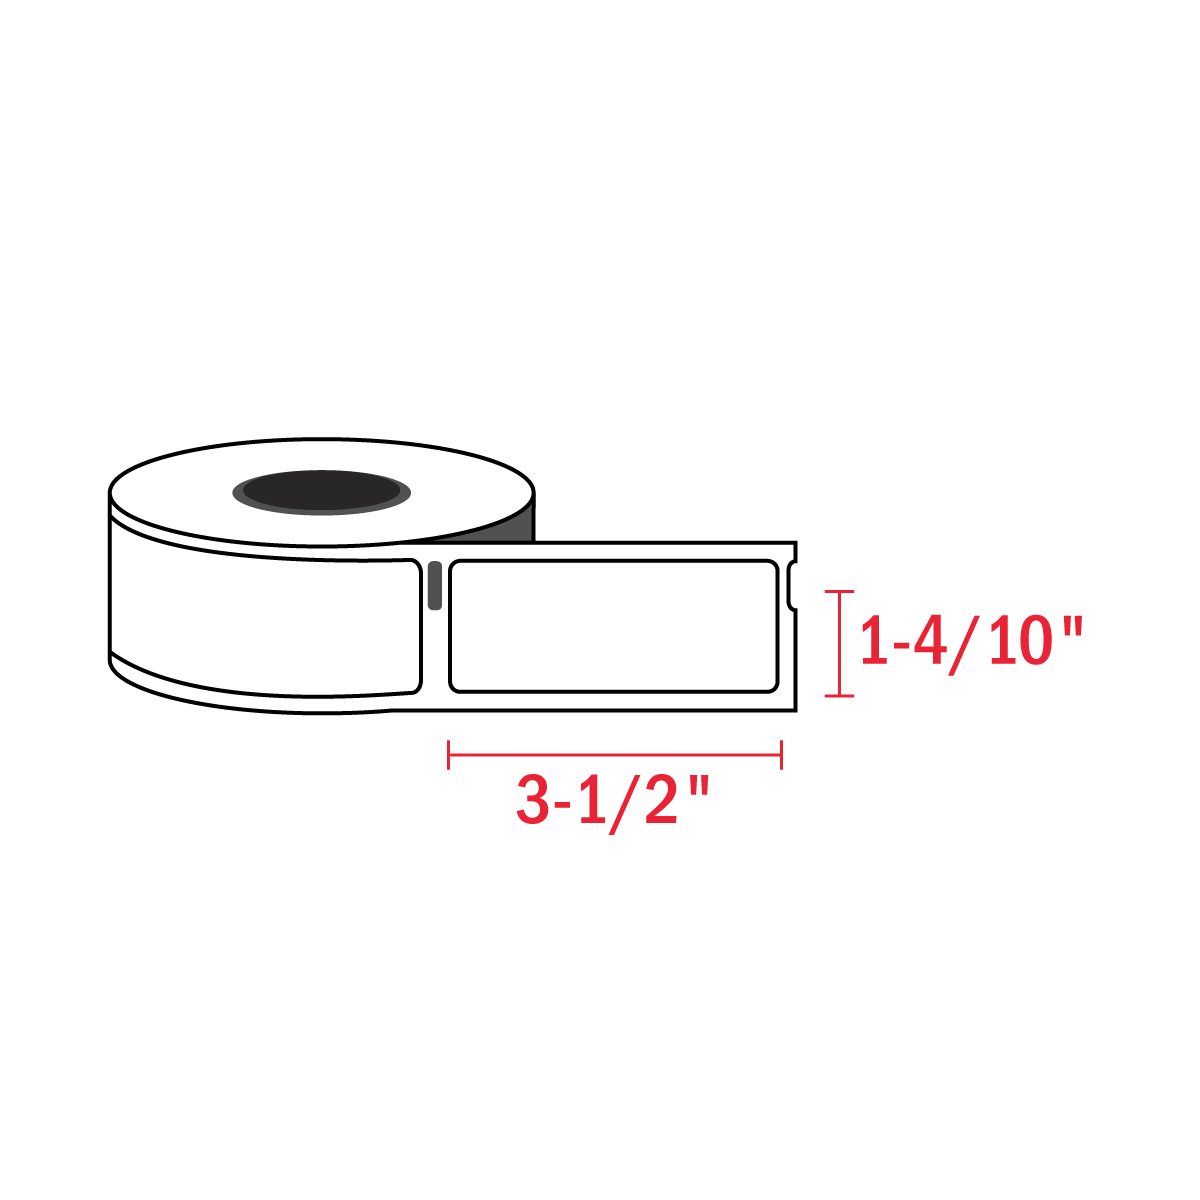 2 Rolls/520 Labels Large Address Labels Compatible DYMO 30321 1-4/10 x 3-1/2 BETCKEY DYMO Labelwriter 450 Compatible with Rollo 4XL & Zebra Desktop Printers